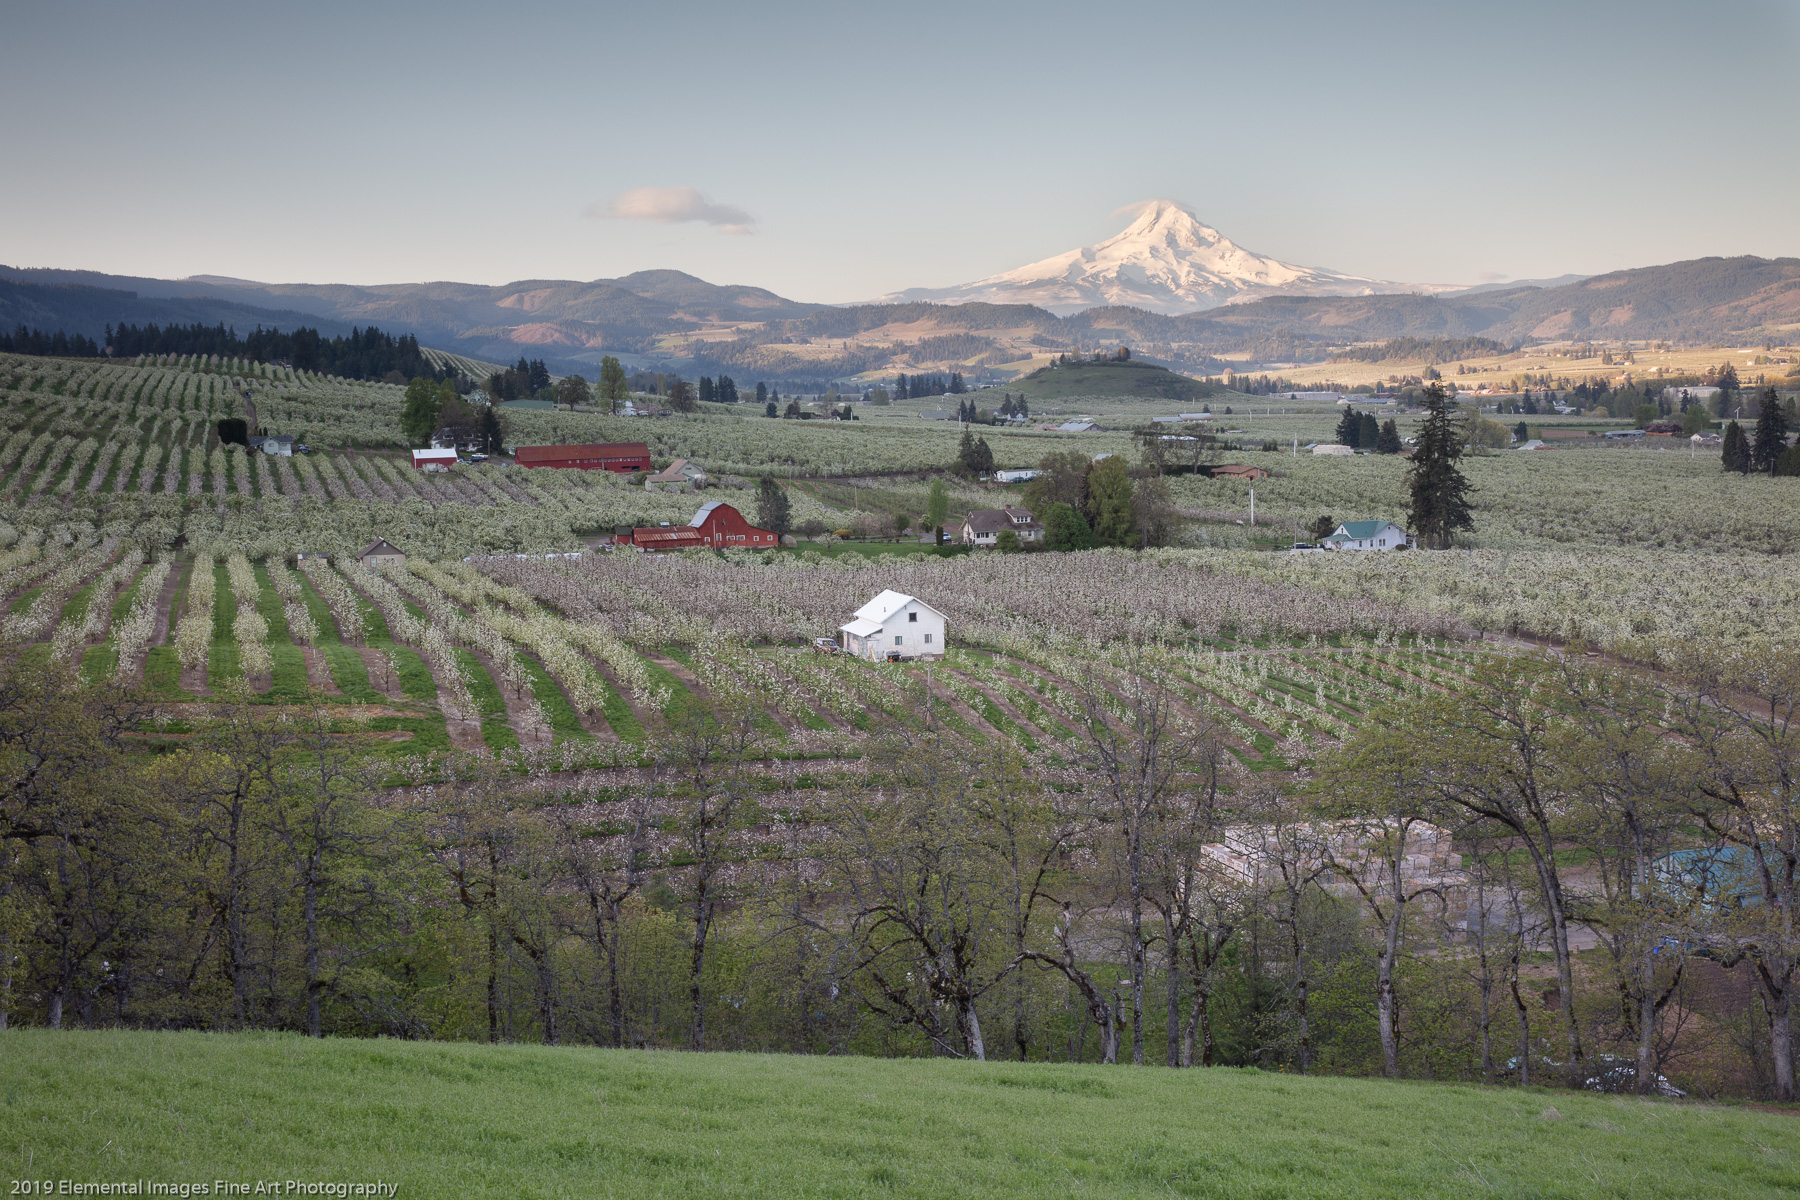 Mt. Hood view | Hood River | OR | USA - © 2019 Elemental Images Fine Art Photography - All Rights Reserved Worldwide